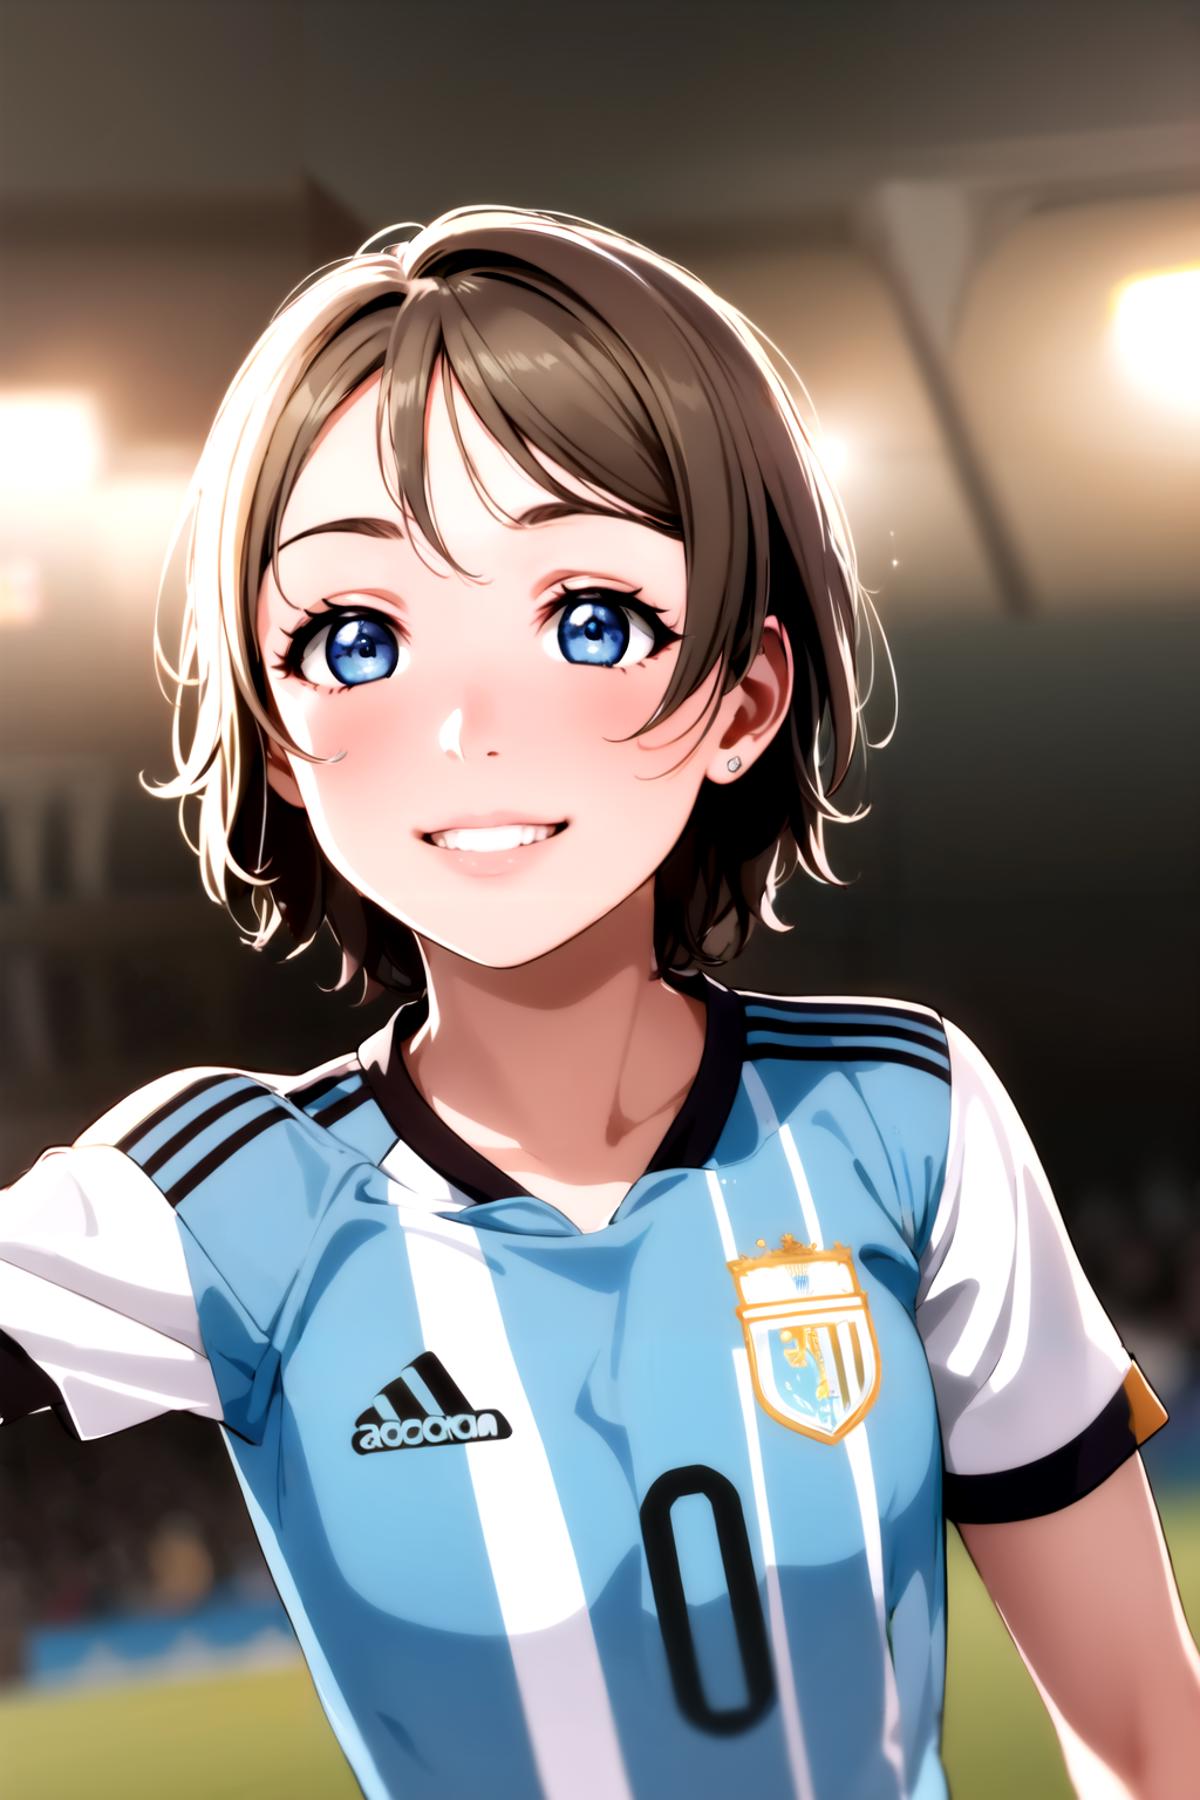 Argentina - Sportswear, Football / Soccer Uniform, Lingerie and more types of clothing image by XianDG